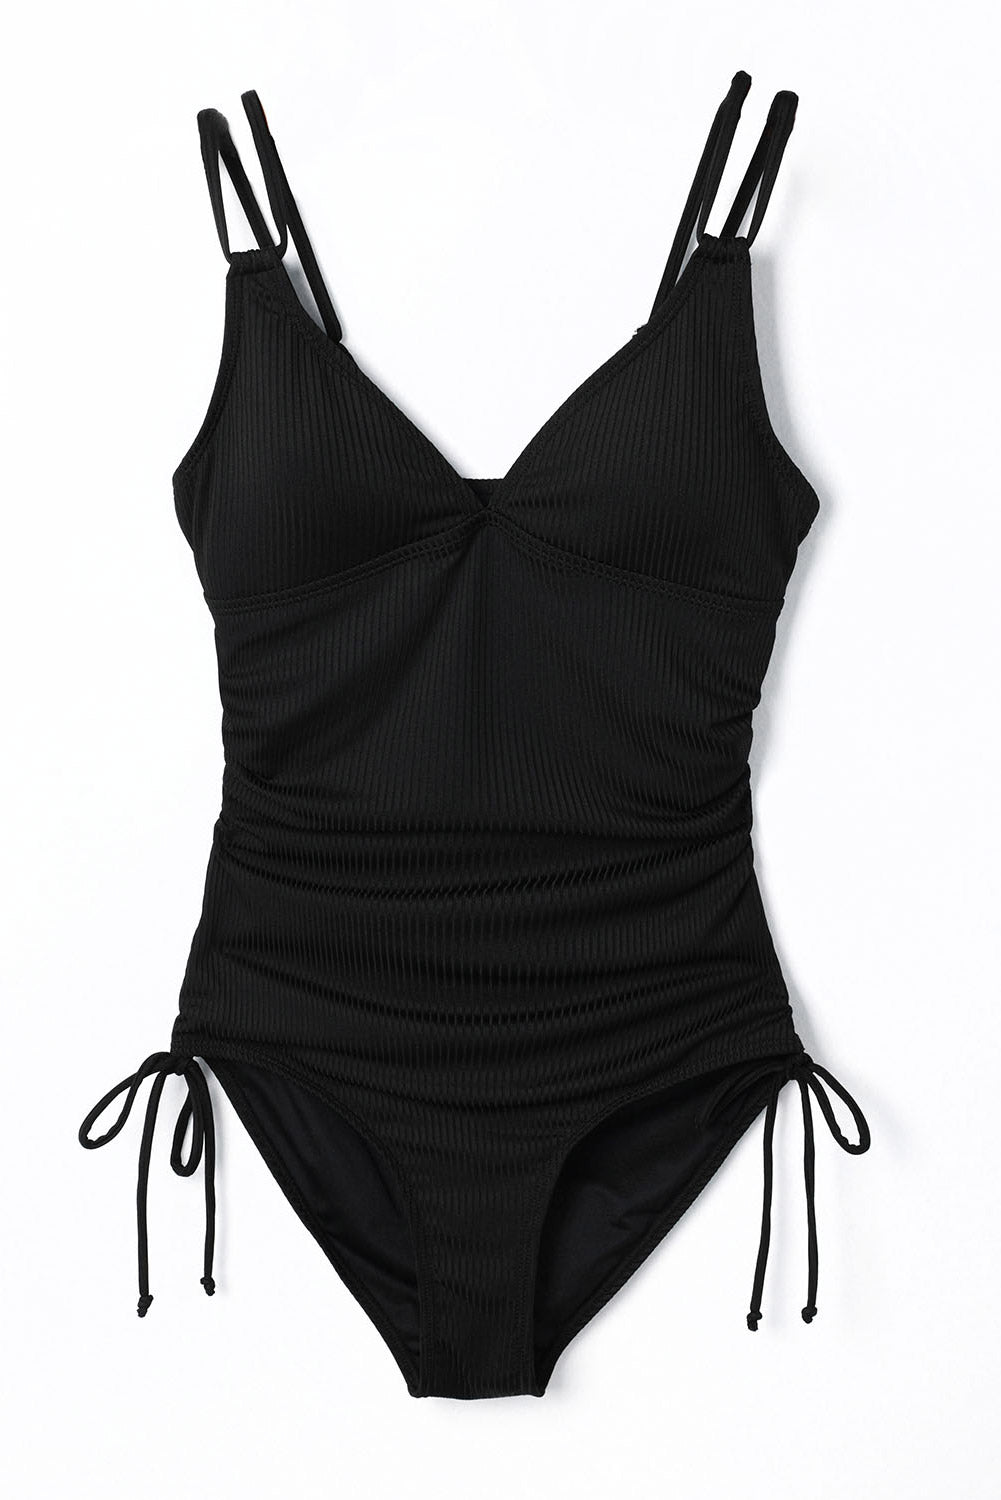 Black Adjustable Straps Side Tie - Ribbed Knit - One Piece Swimsuit